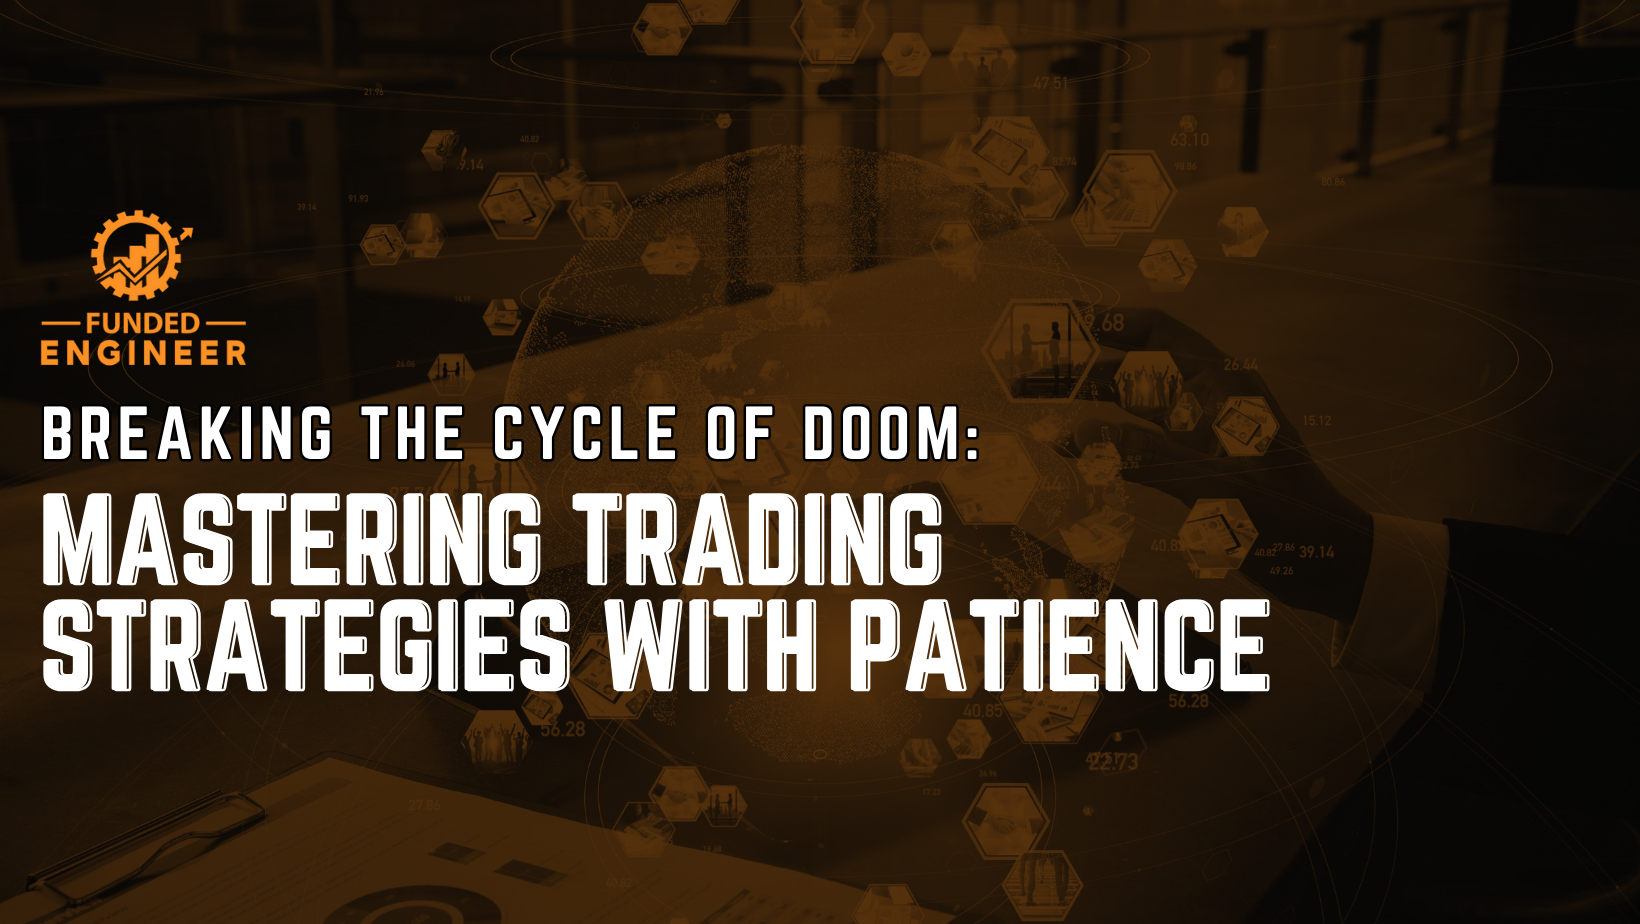 Breaking the Cycle of Doom: Mastering Trading Strategies with Patience